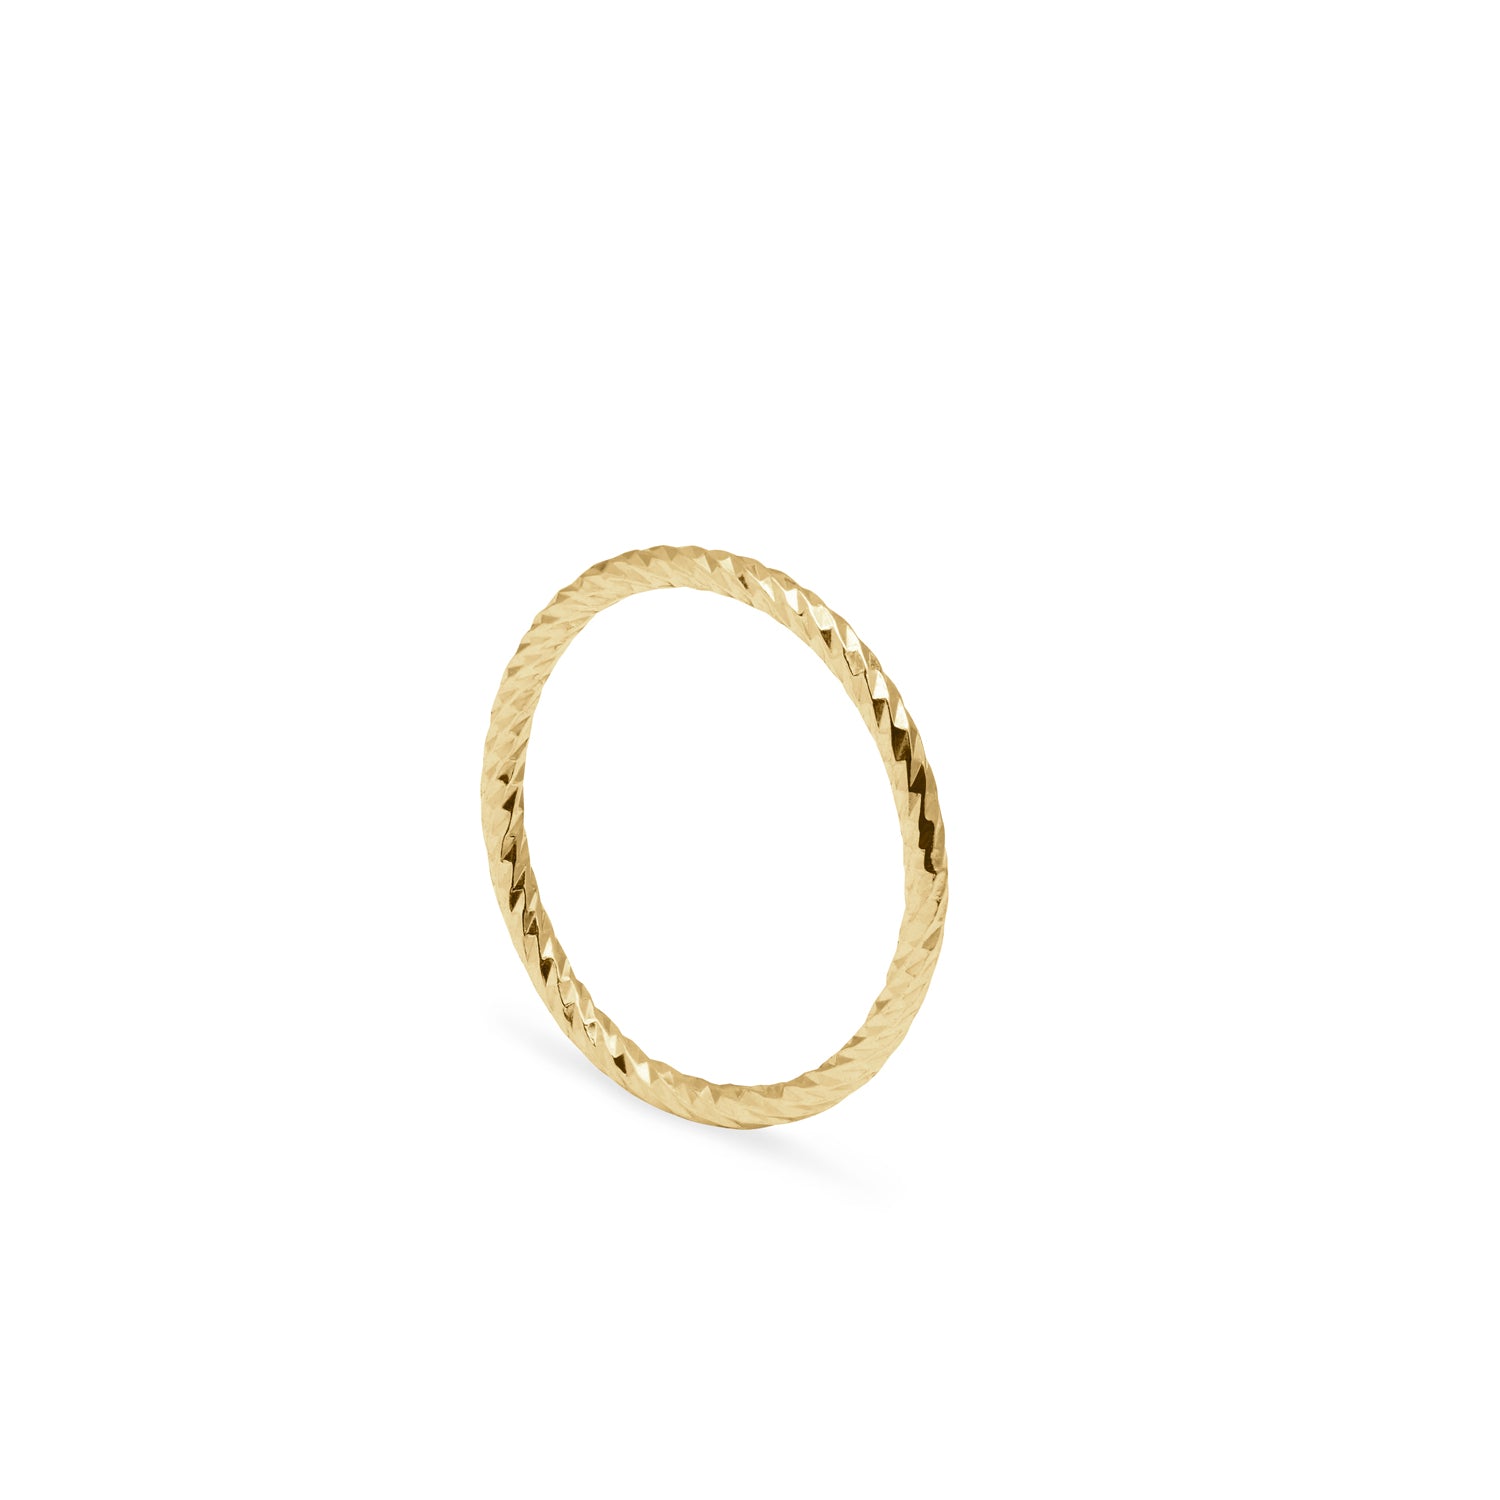 Faceted Diamond Ring - 9k Yellow Gold - Myia Bonner Jewellery